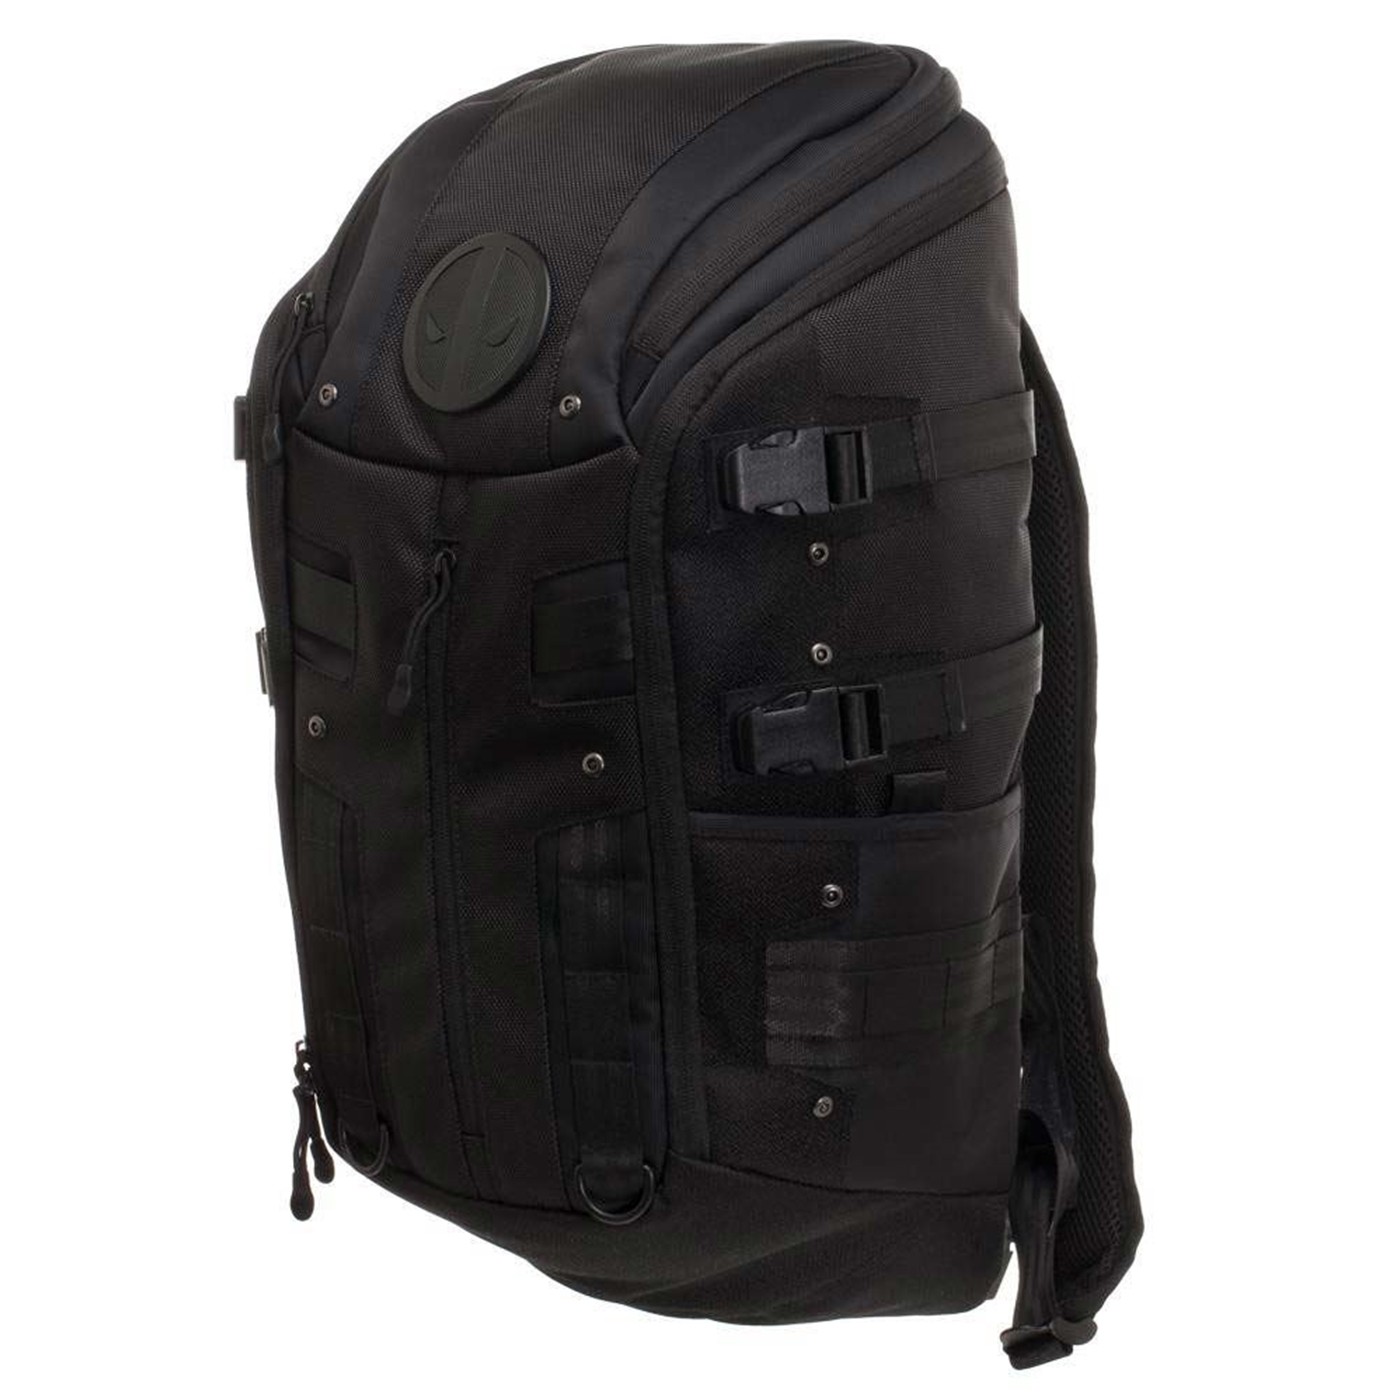 Deadpool Tactical Backpack - image 2 of 4